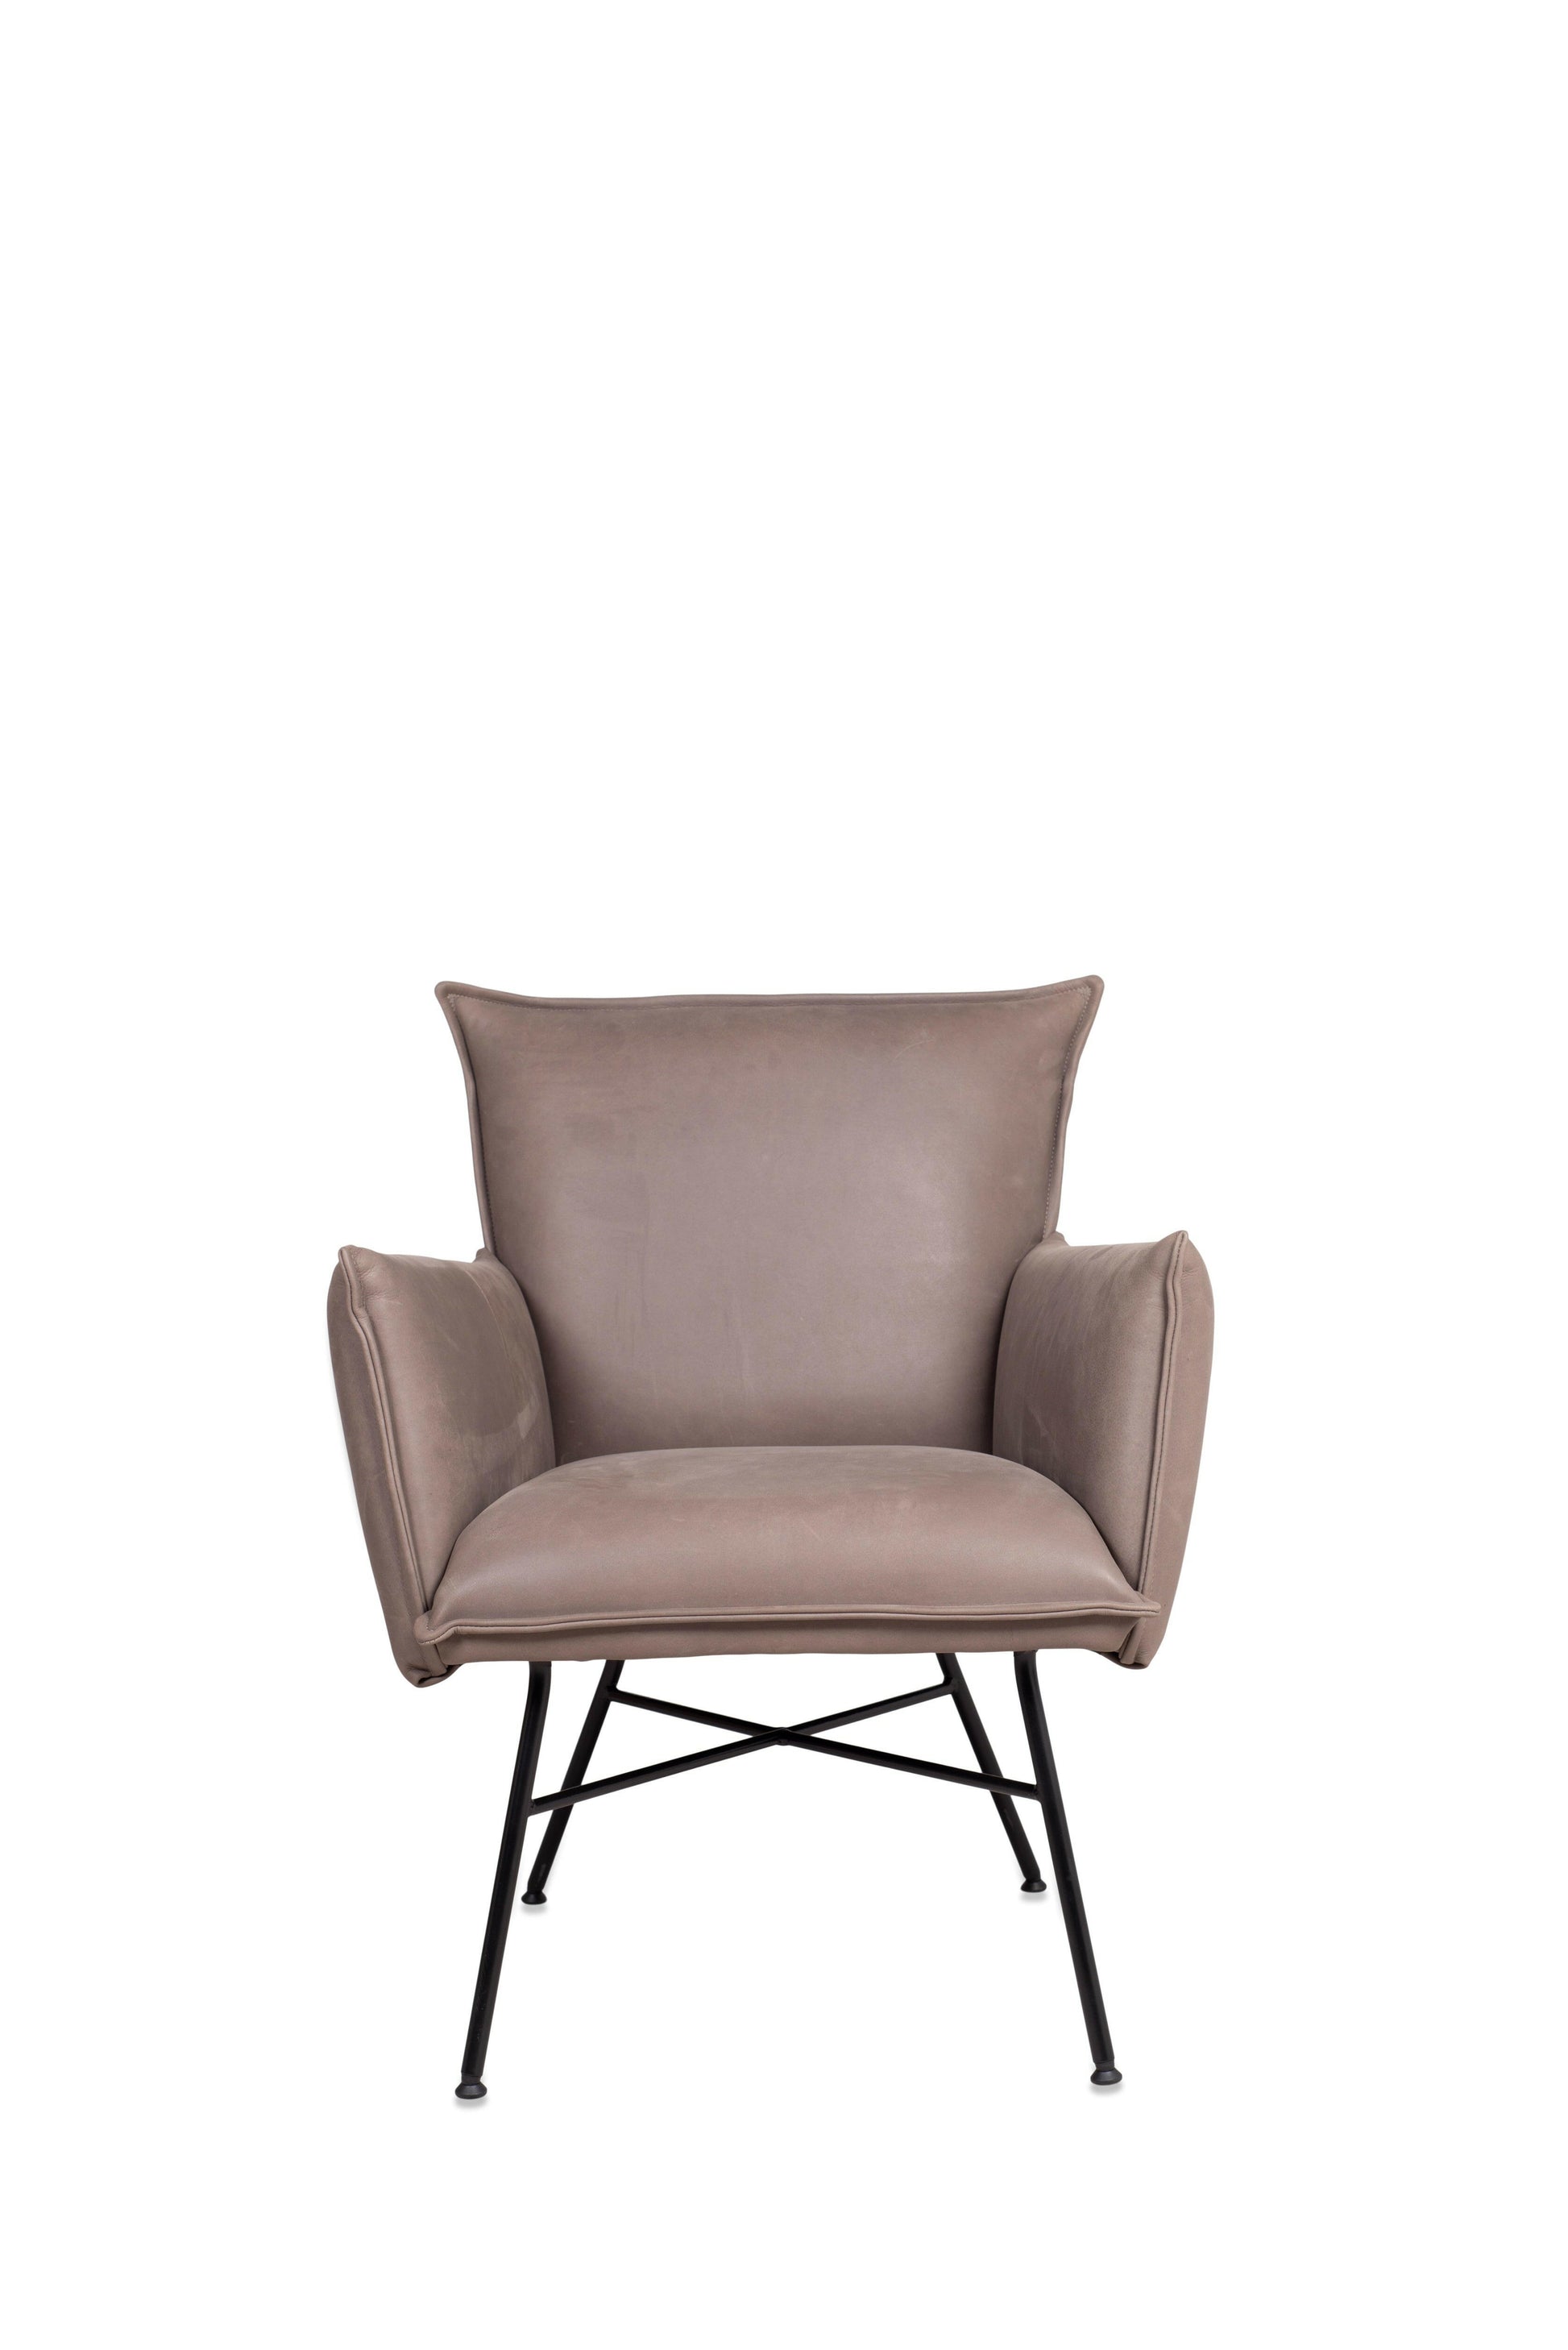 Sanne 16mm Old Glory Frame - Lounge Chairs